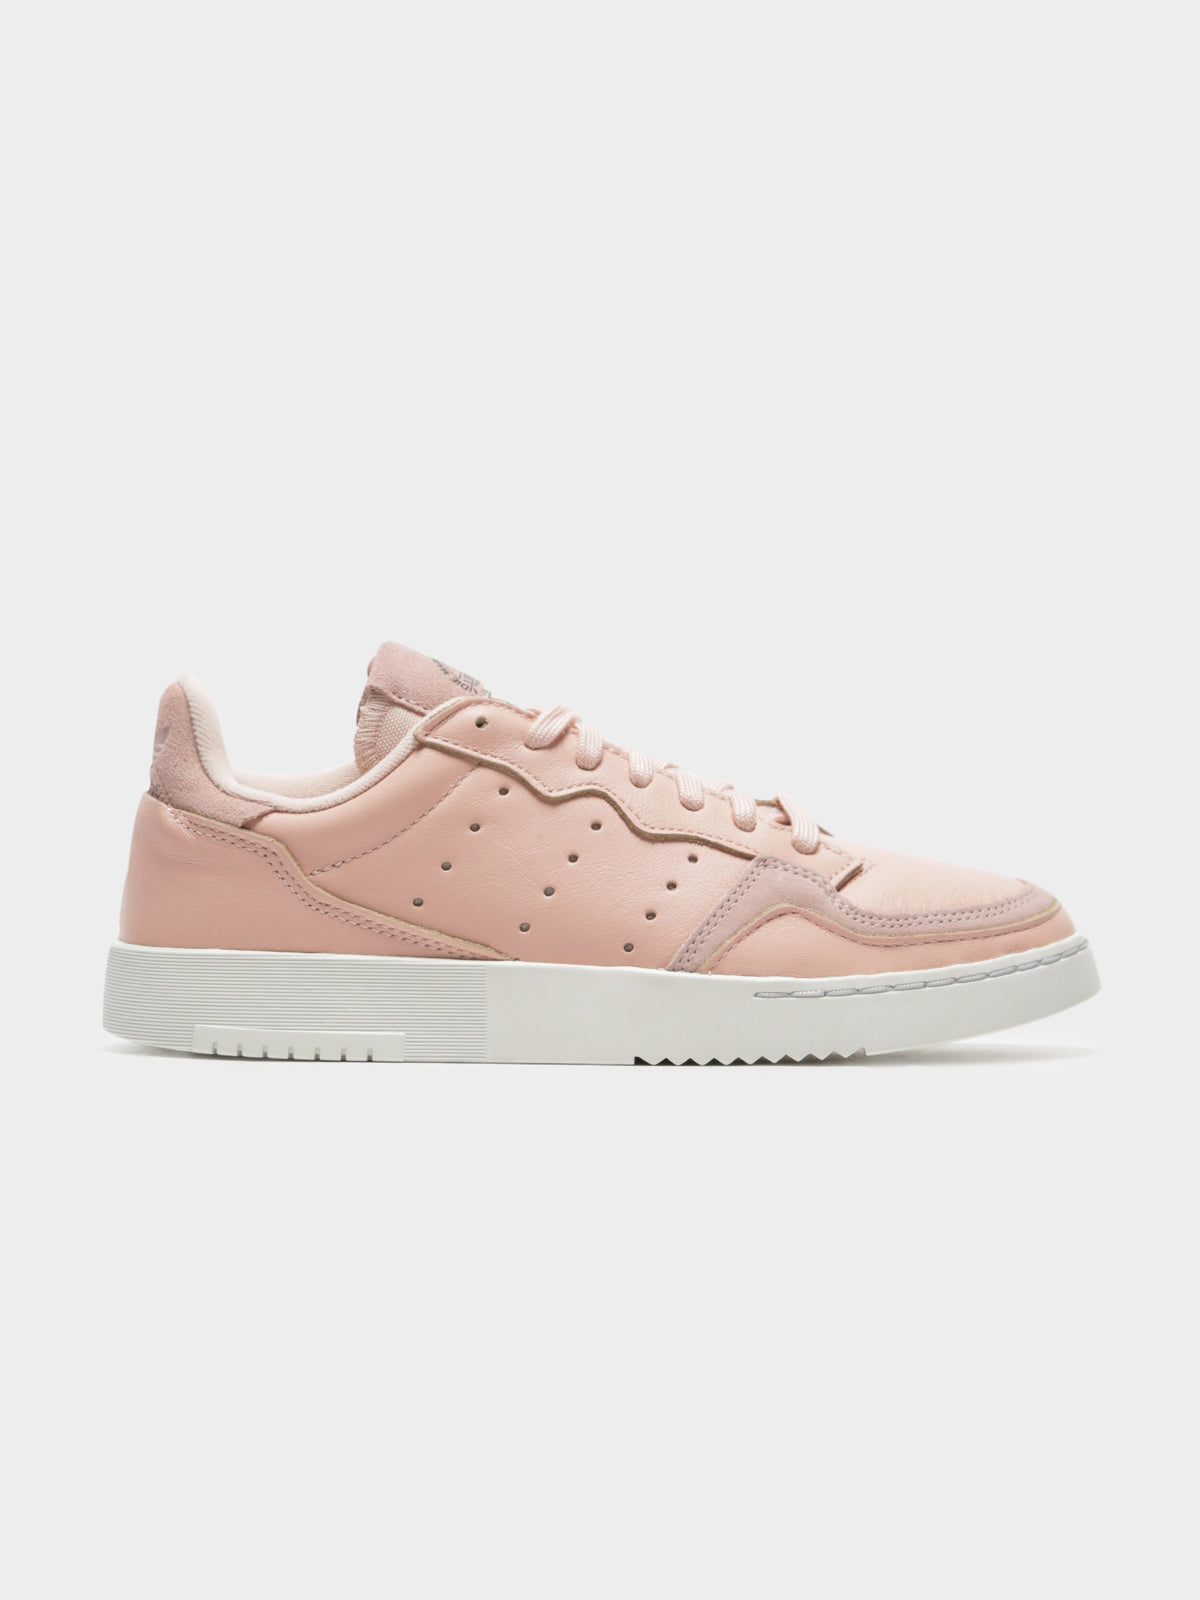 Supercourt Leather Sneaker in Pink